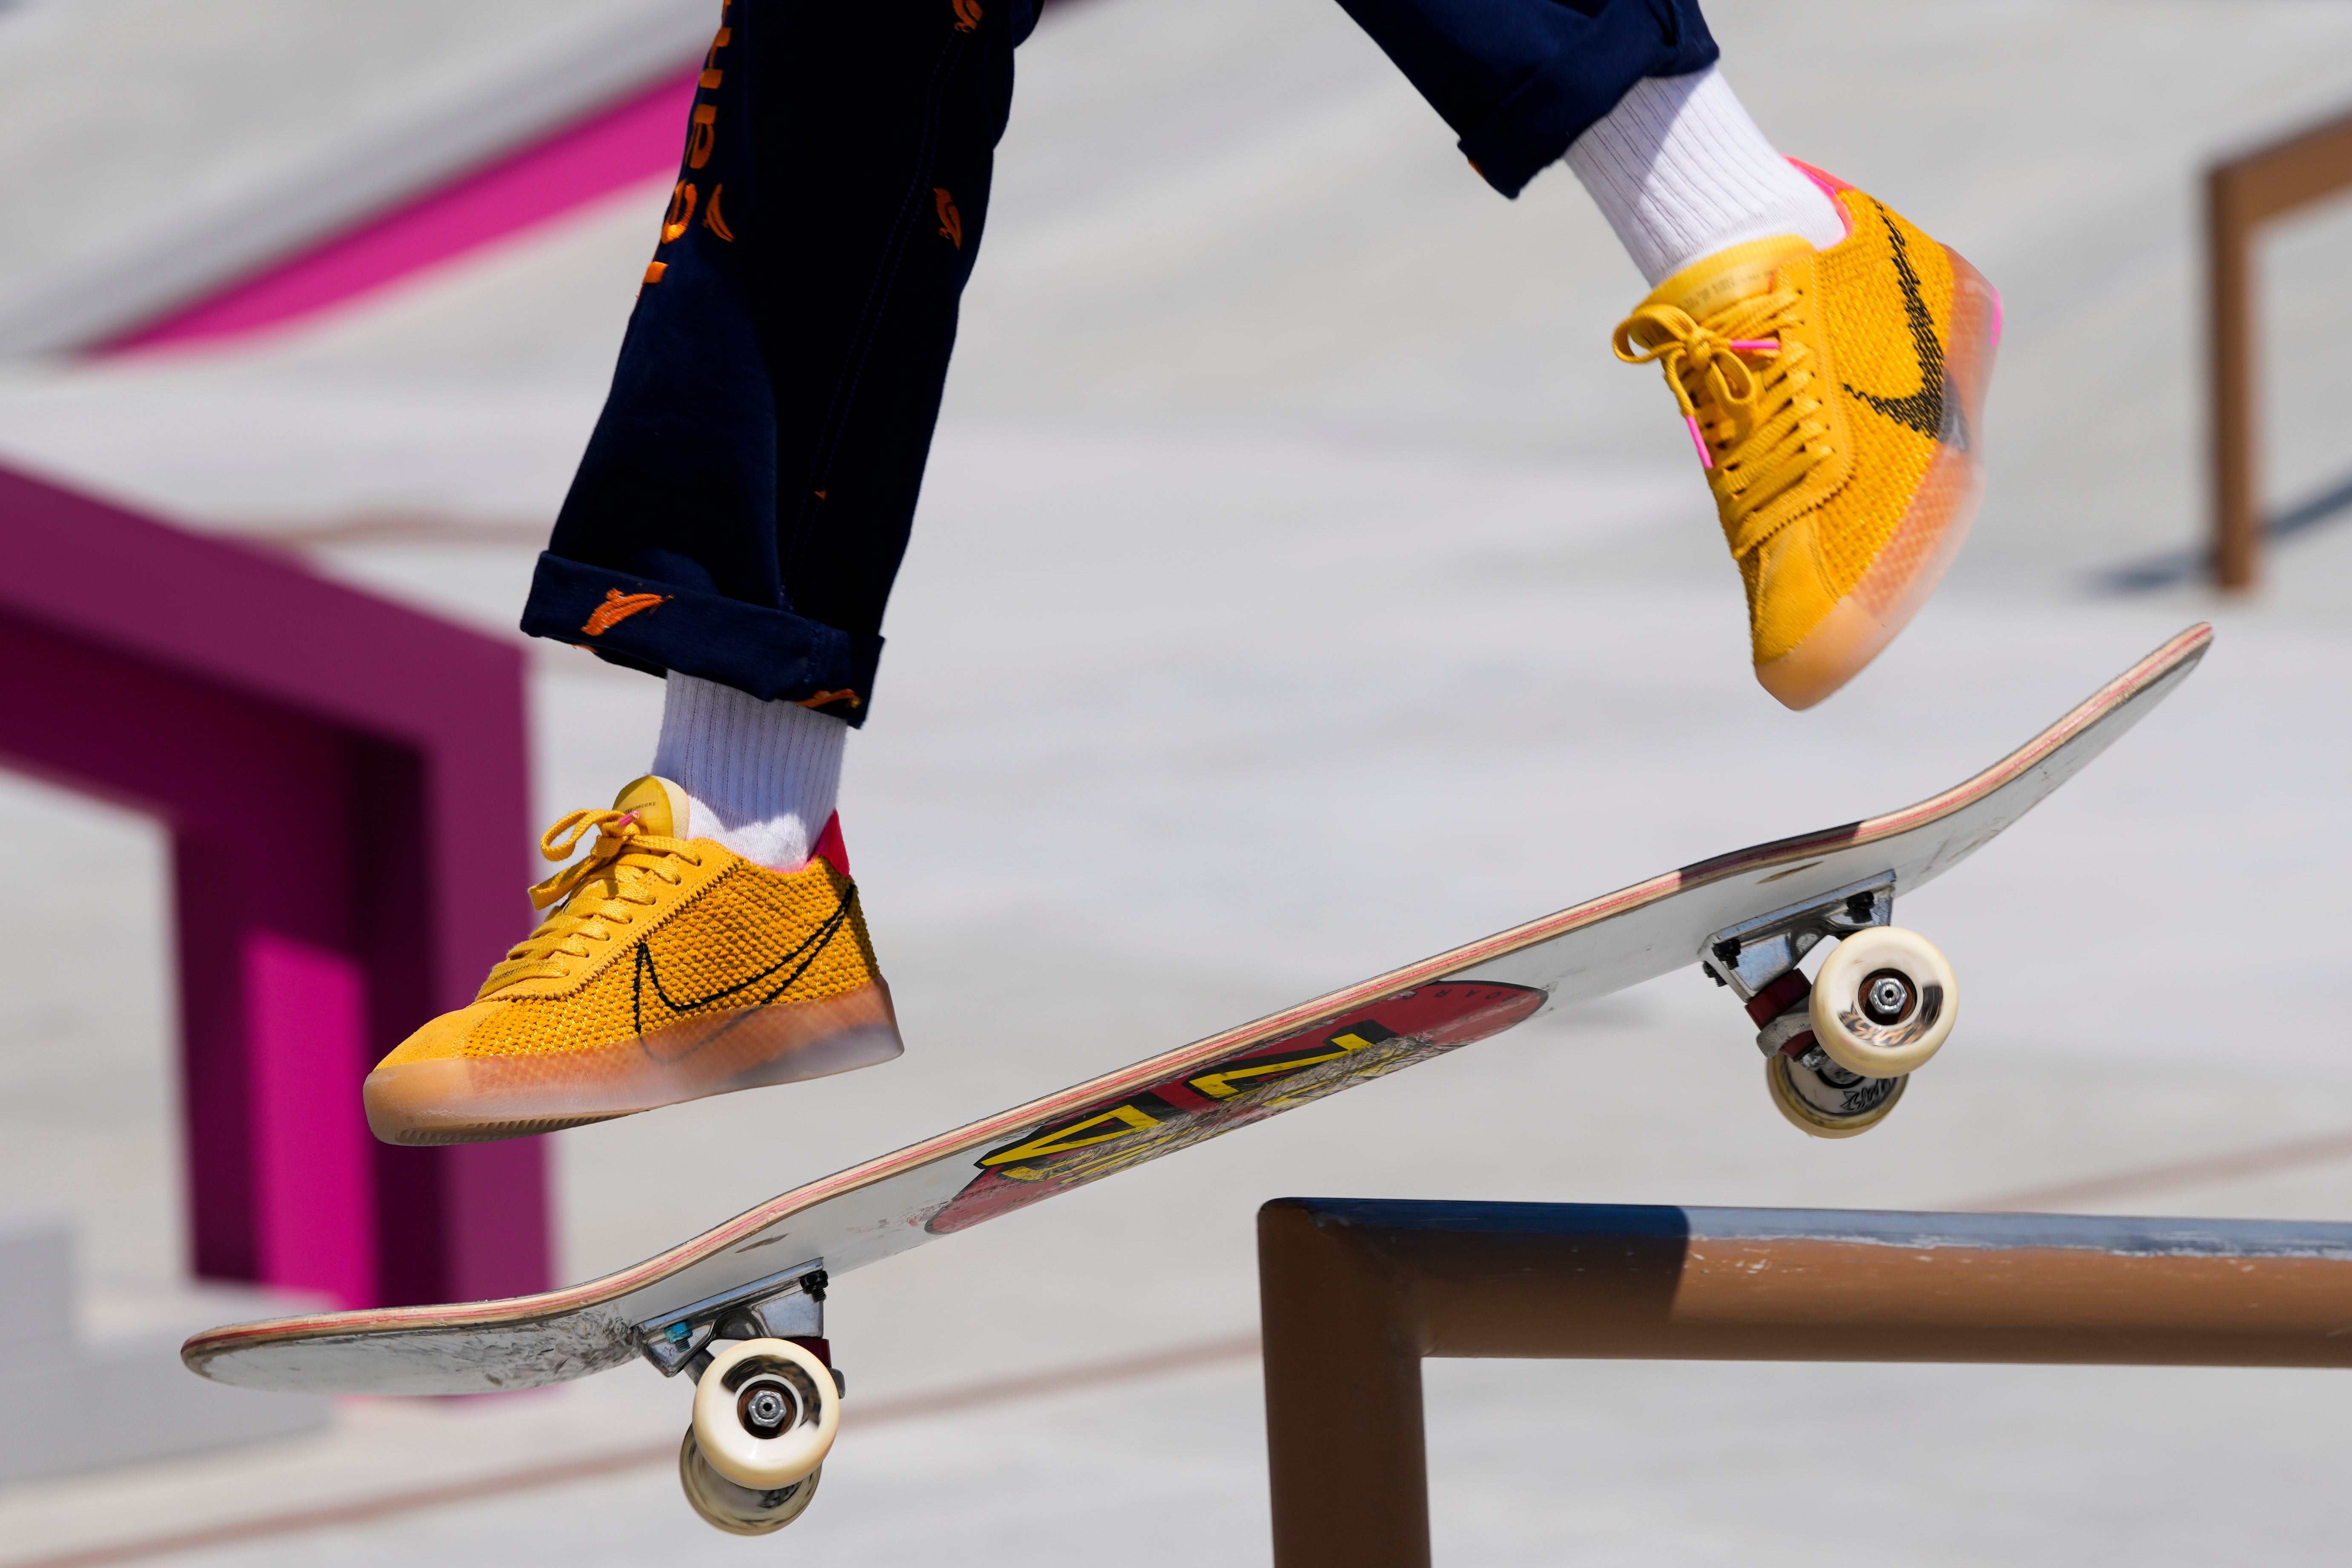 Skateboarding at Tokyo Olympics: How is it judged and what are the tricks called? | Independent